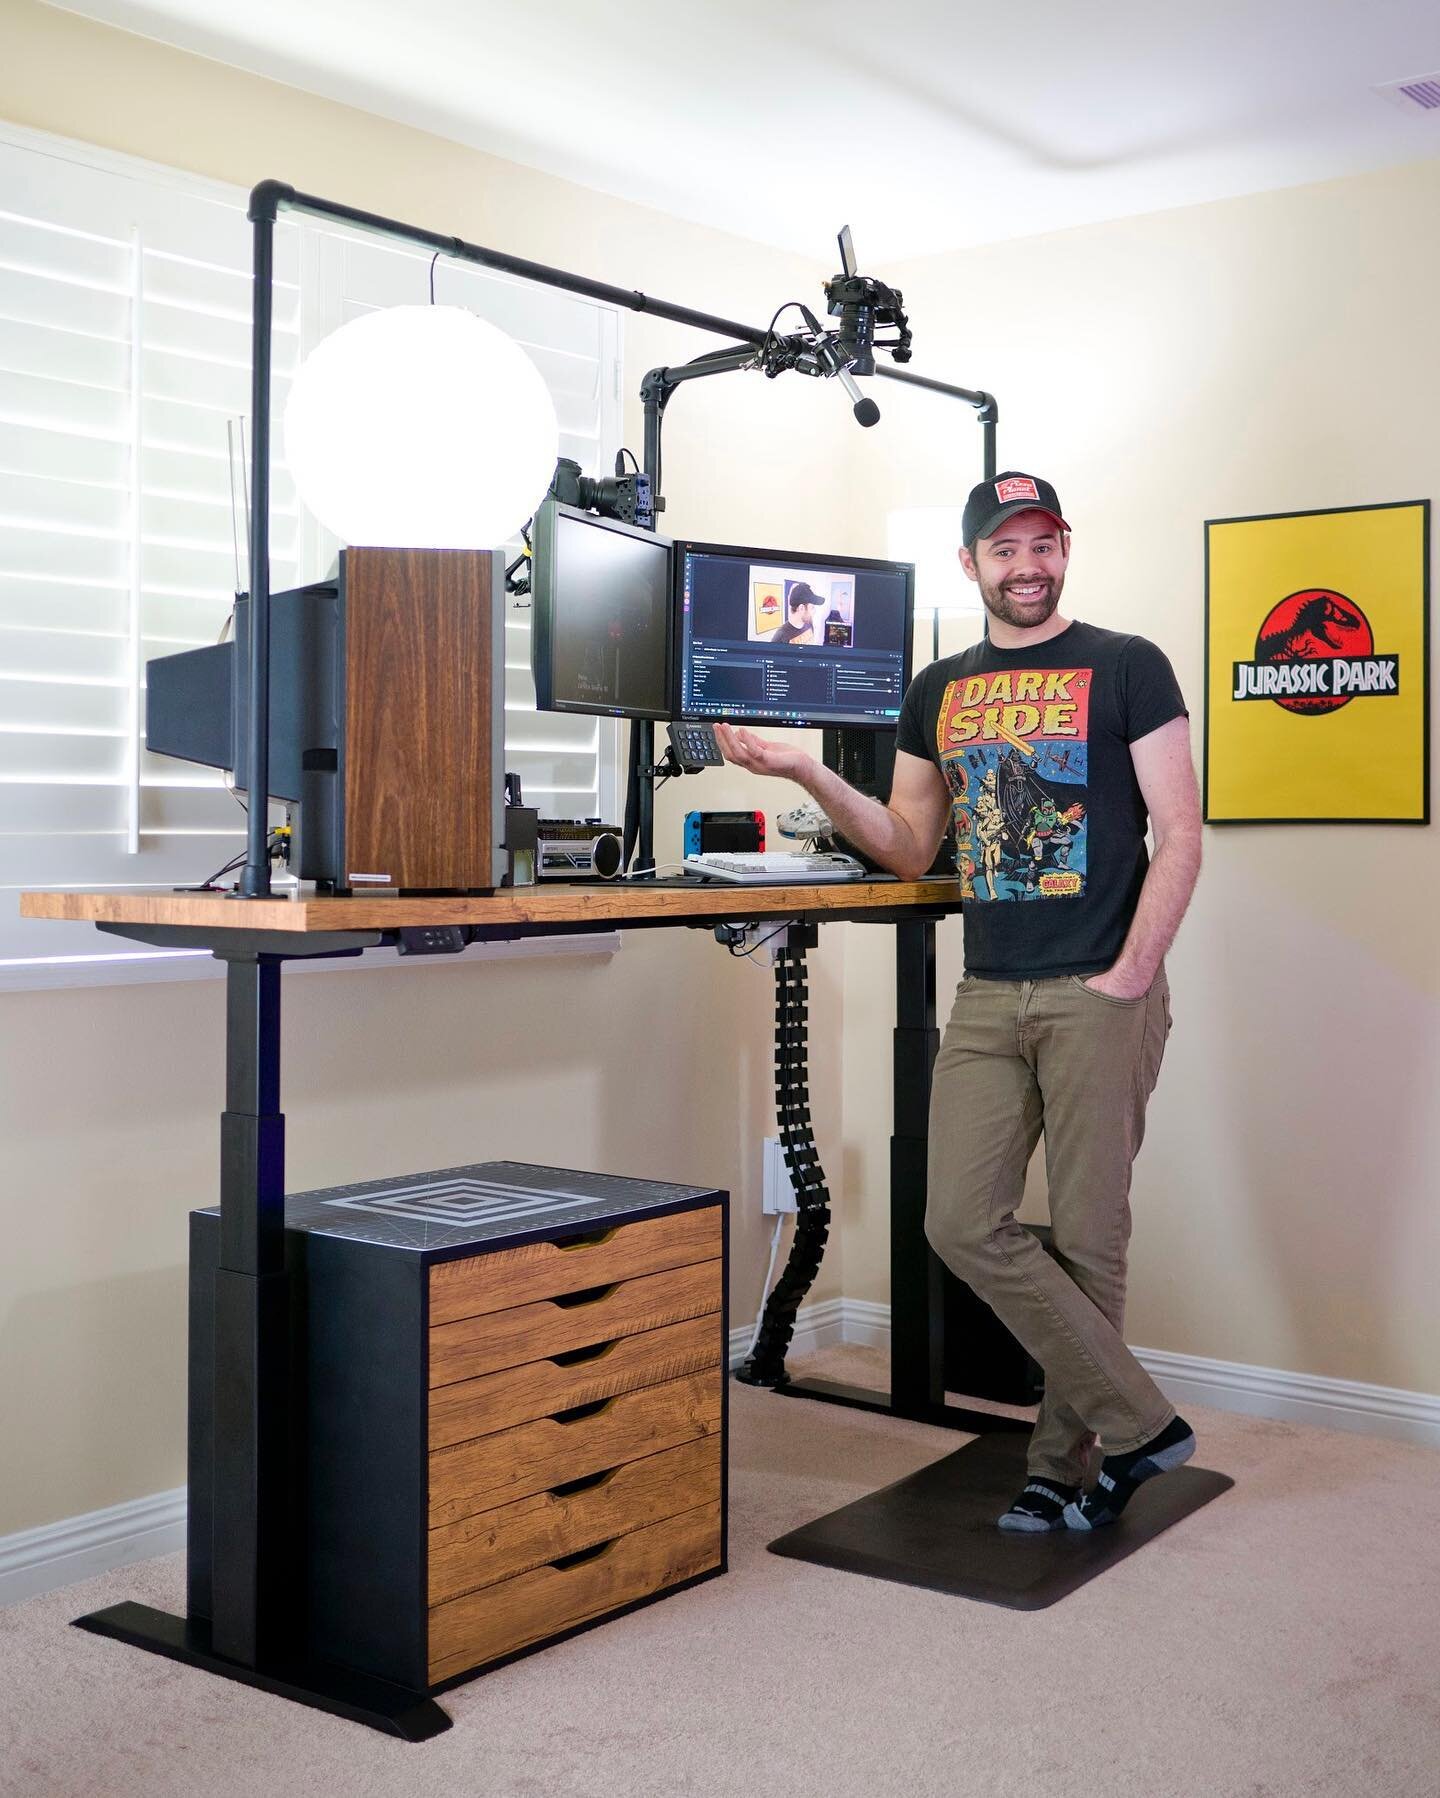 I present to you the ultimate sit/stand desk for twitch streaming. I've been wanting a standing desk for some time now and after a good deal of research, a few days of building, and 2 days of cable management, I came up with the perfect desk. I'm so 